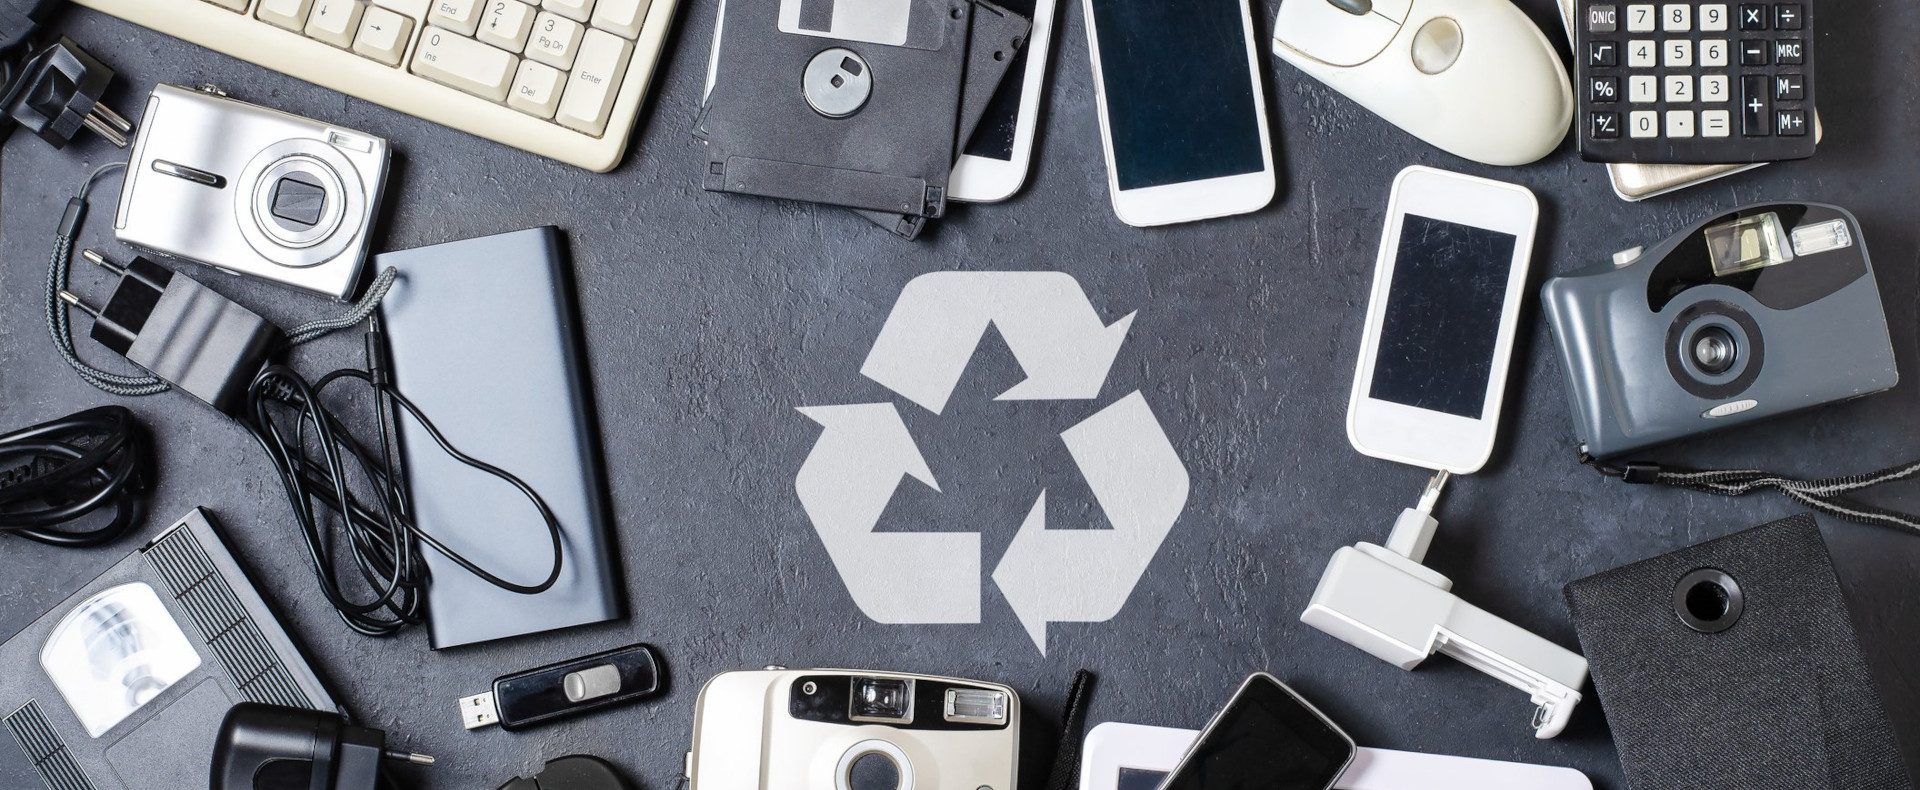 broken phones, cameras, keyboards and more on a grey table with a white recycling logo in the centre